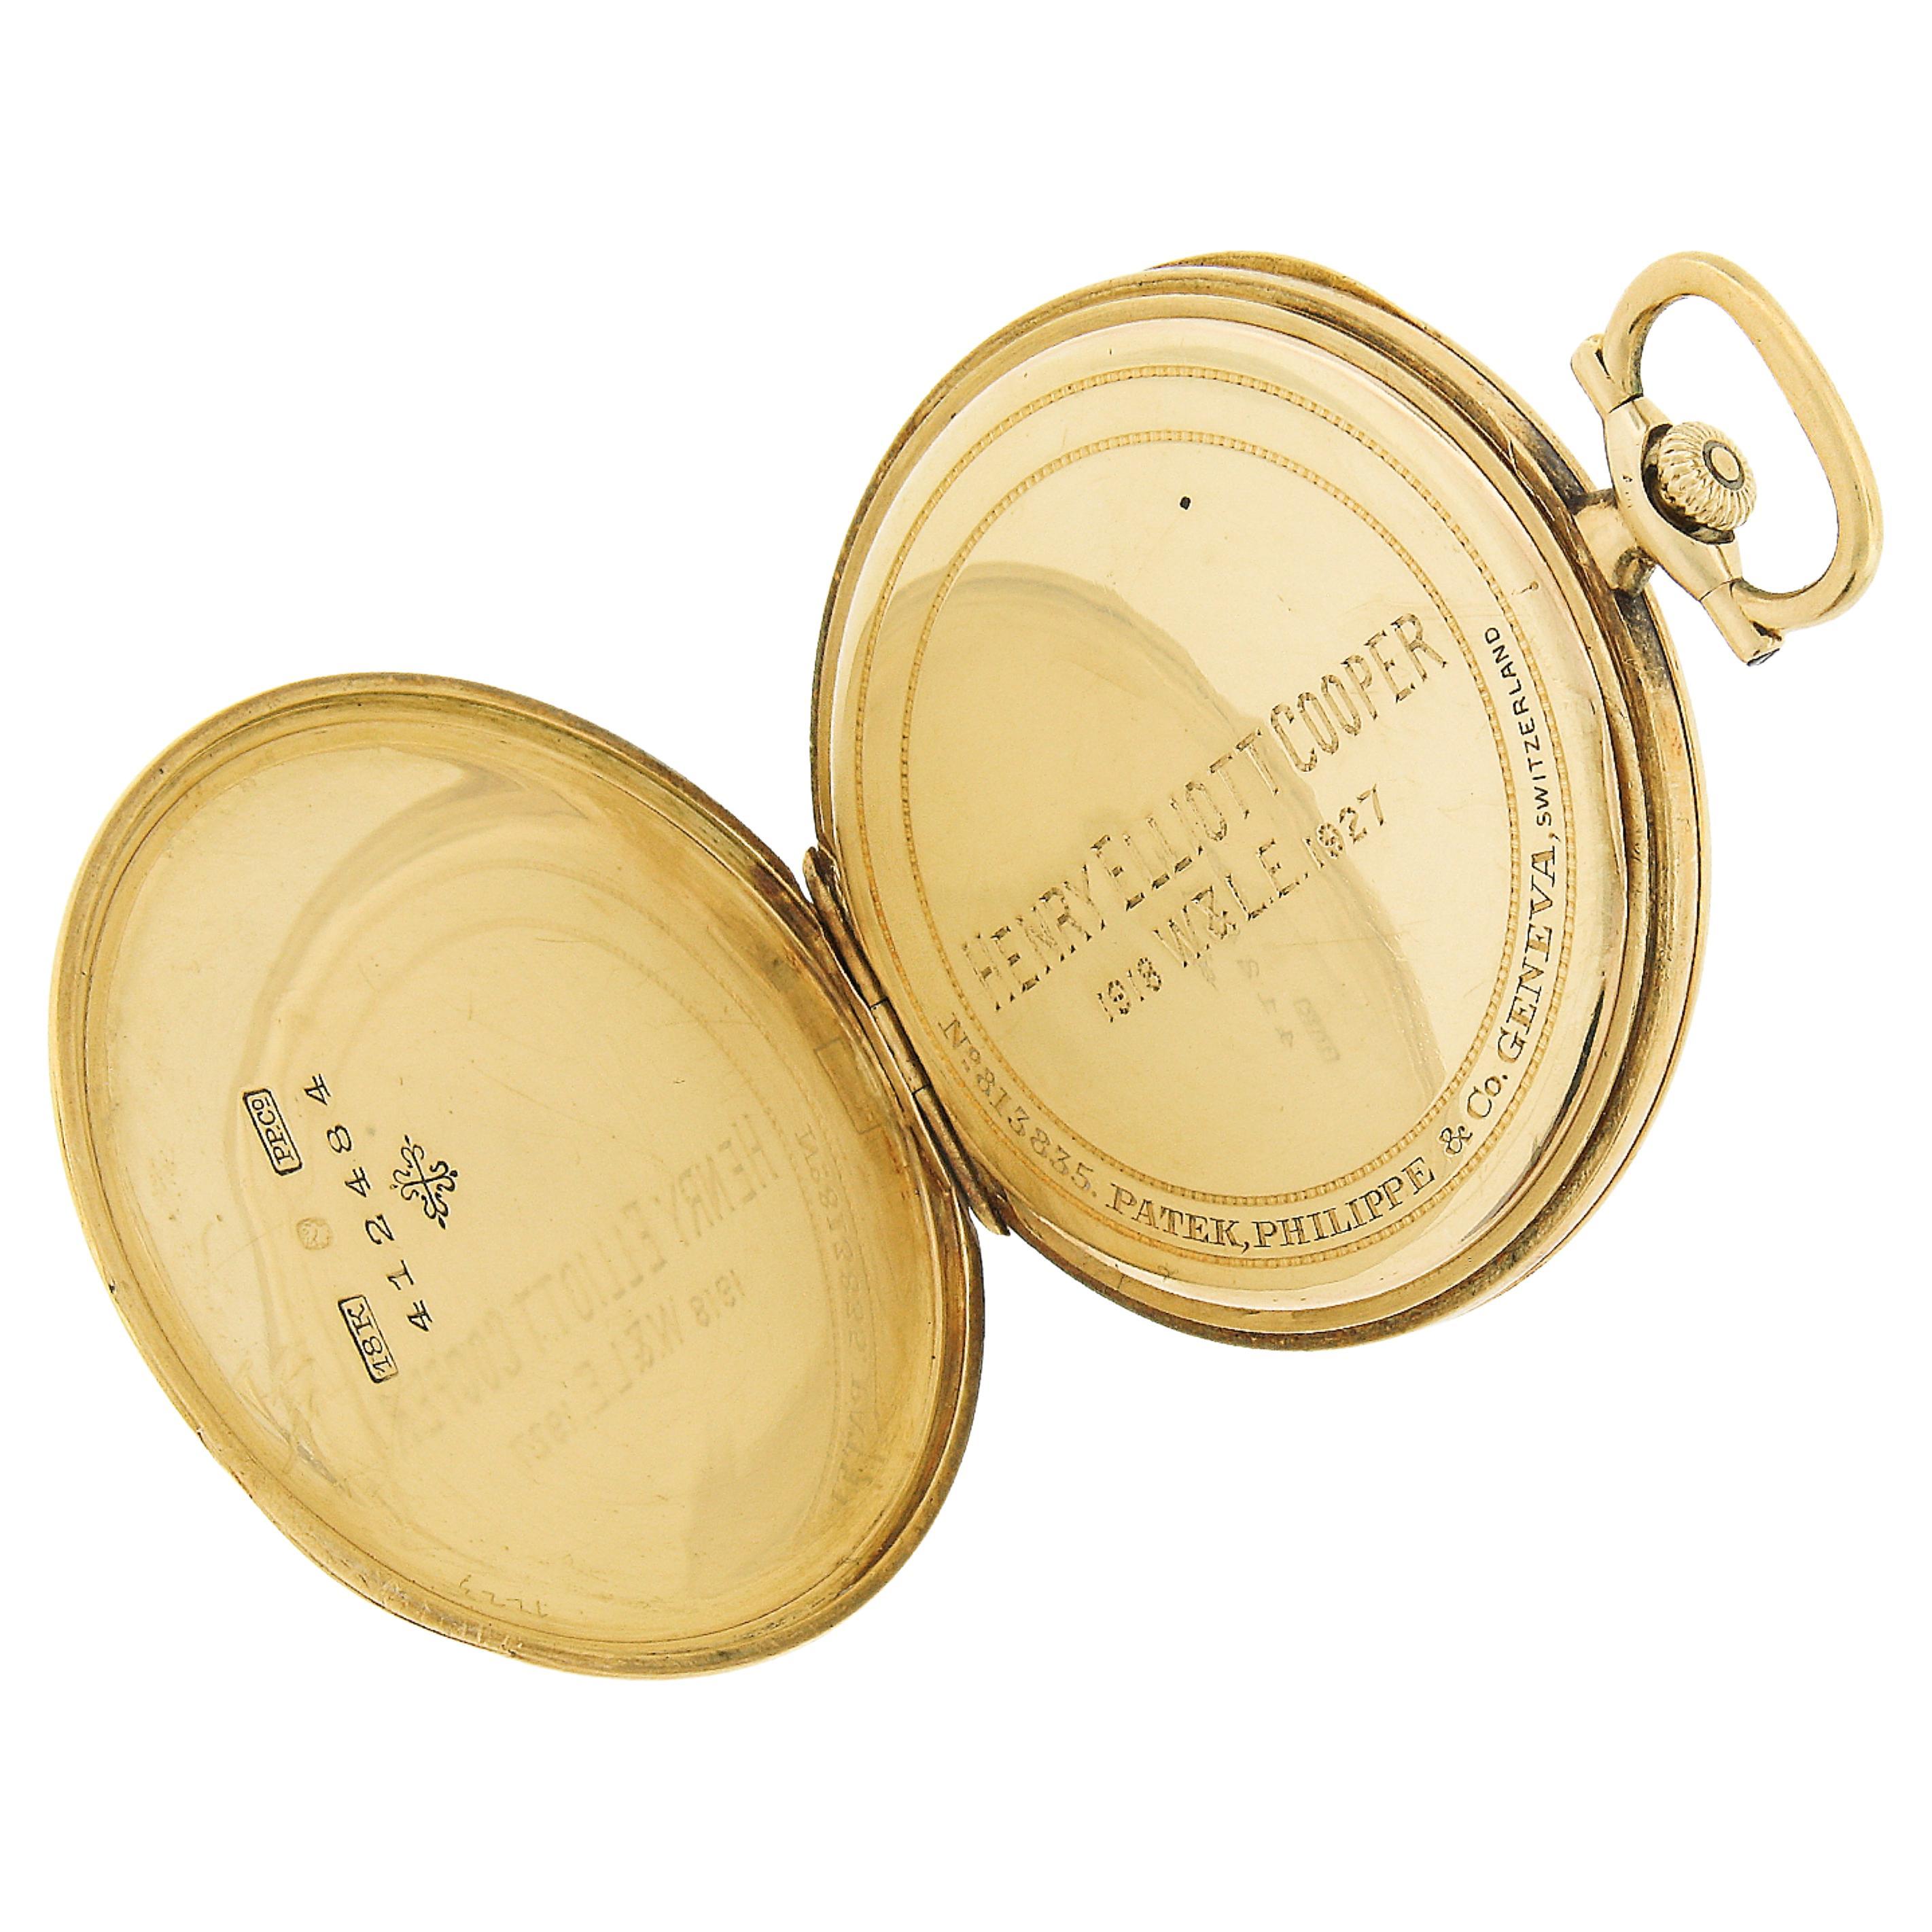 This classy antique Patek Philippe & Co. pocket watch features a solid 18k yellow gold open face case that is adorned with a bold personal engraving which reads the monogrammed letters 